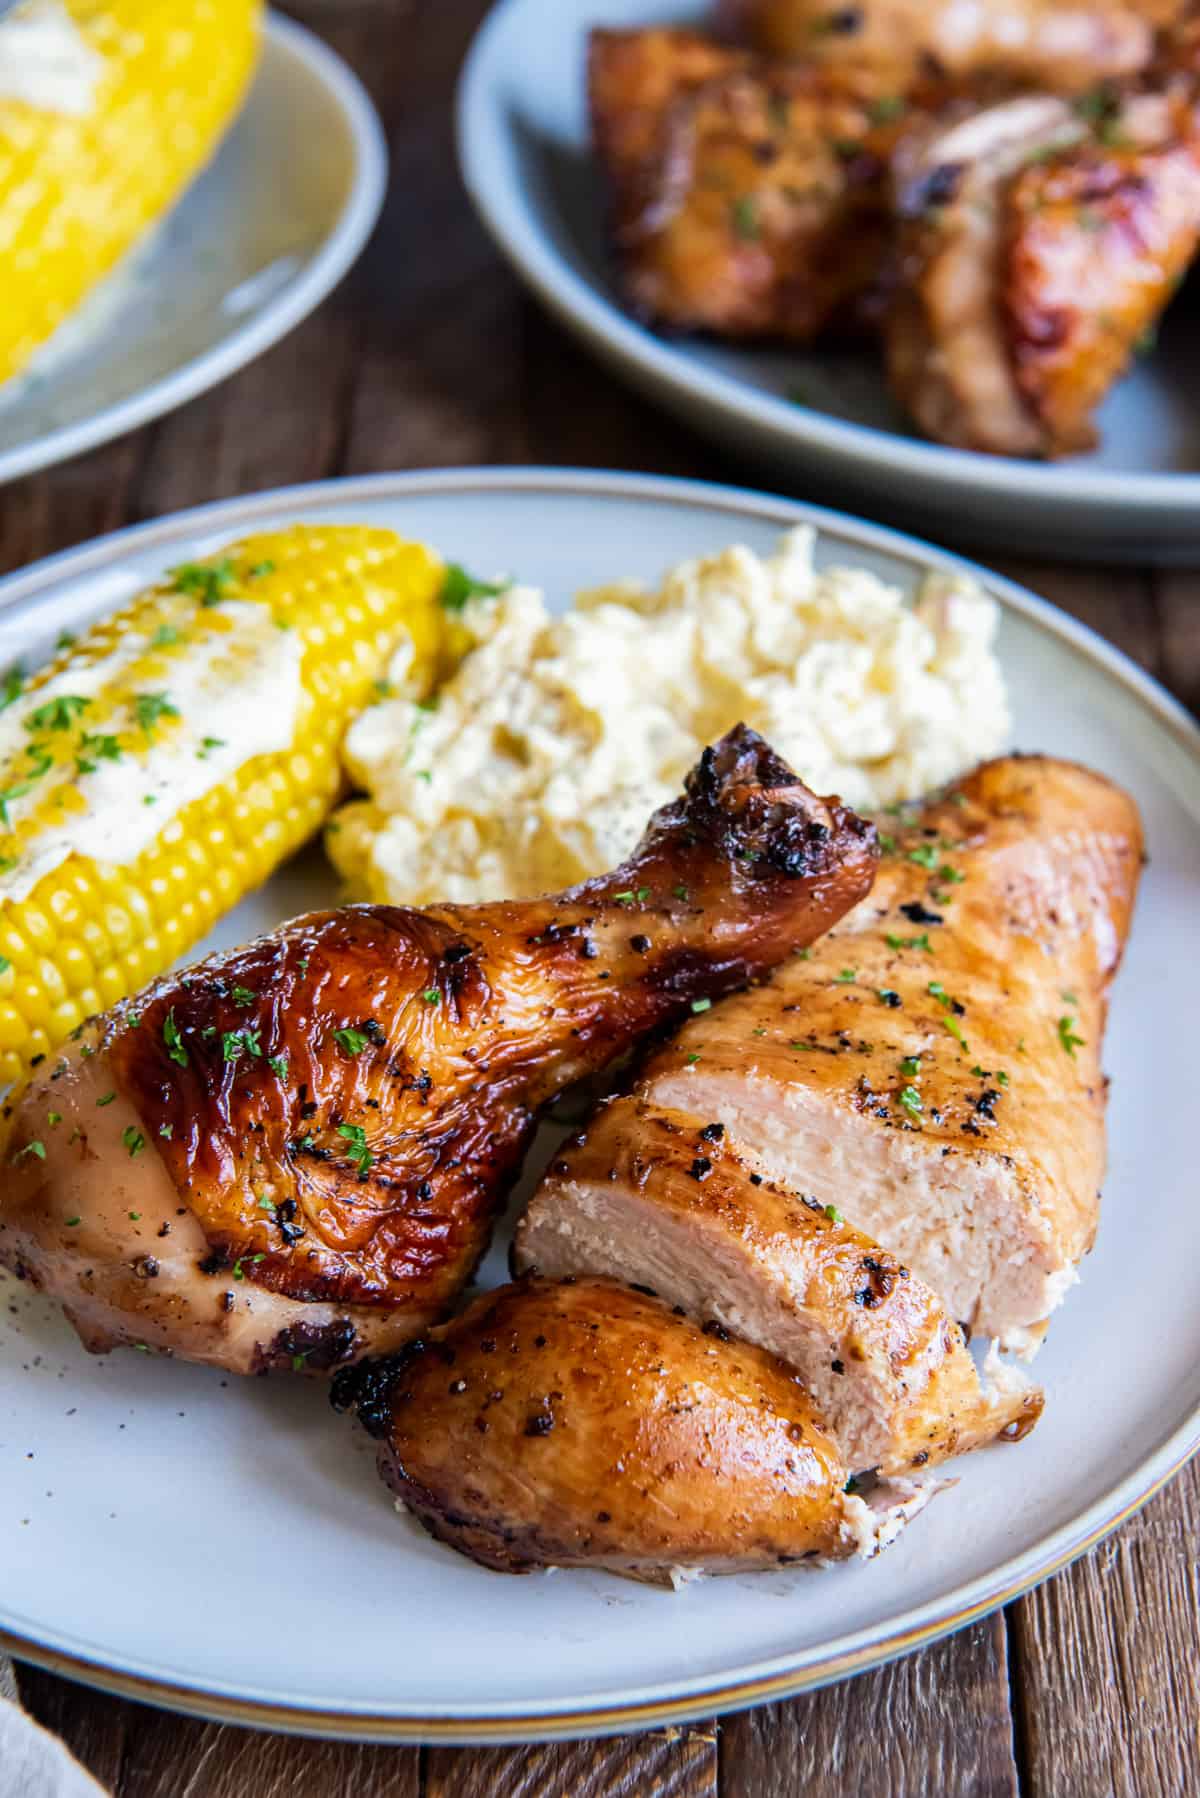 Sliced grilled chicken breast and a drumstick on a plate with corn and potatoes.